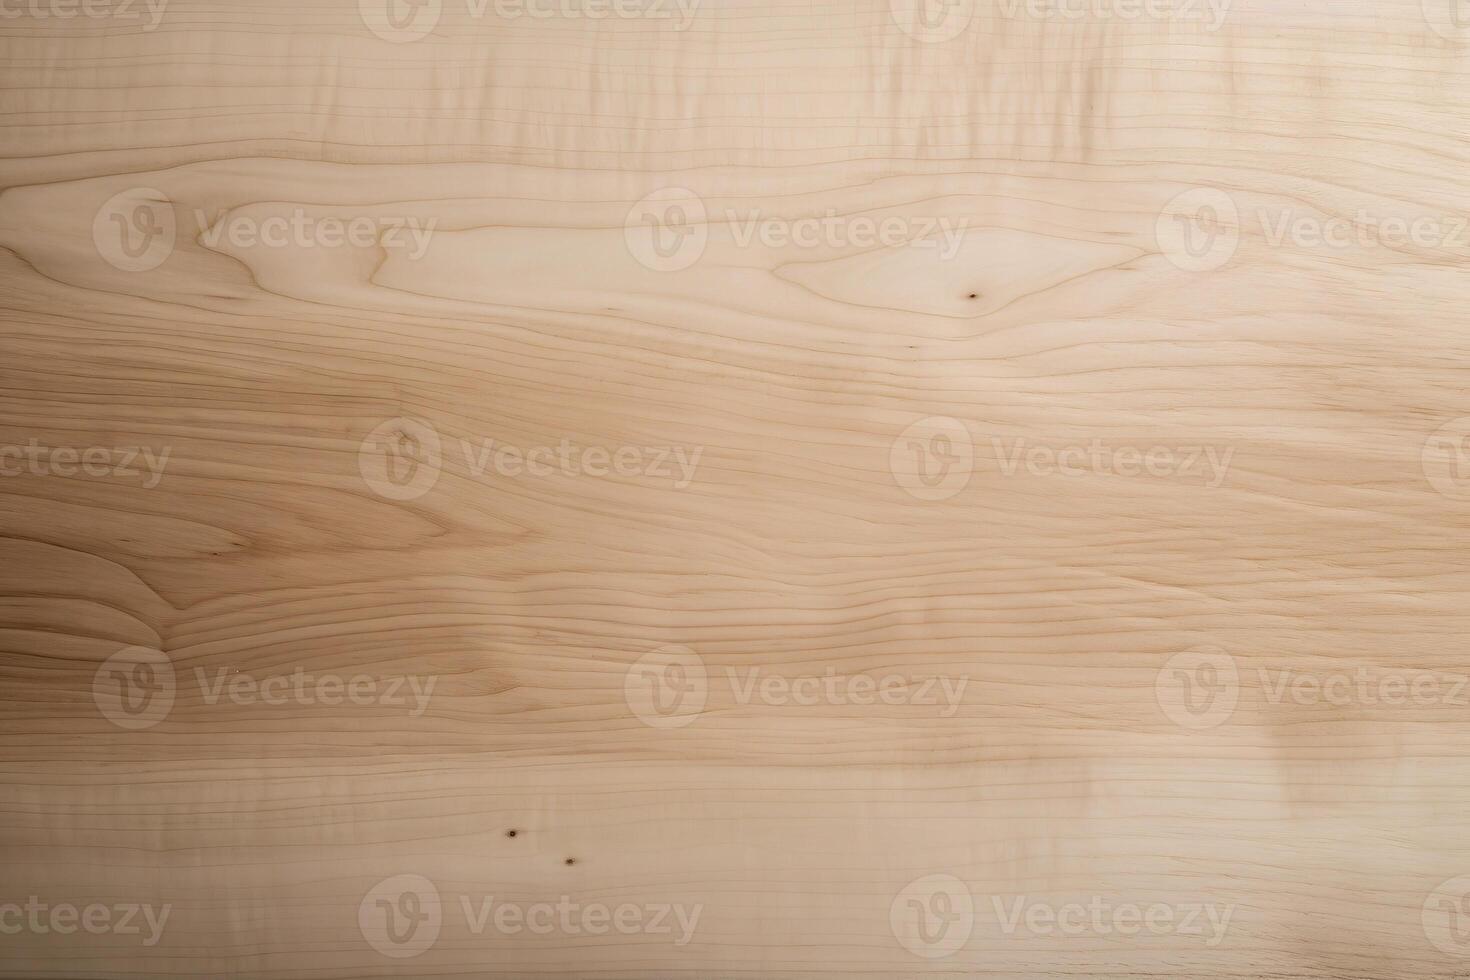 Smooth Maple Wood Texture Background Illustration with photo